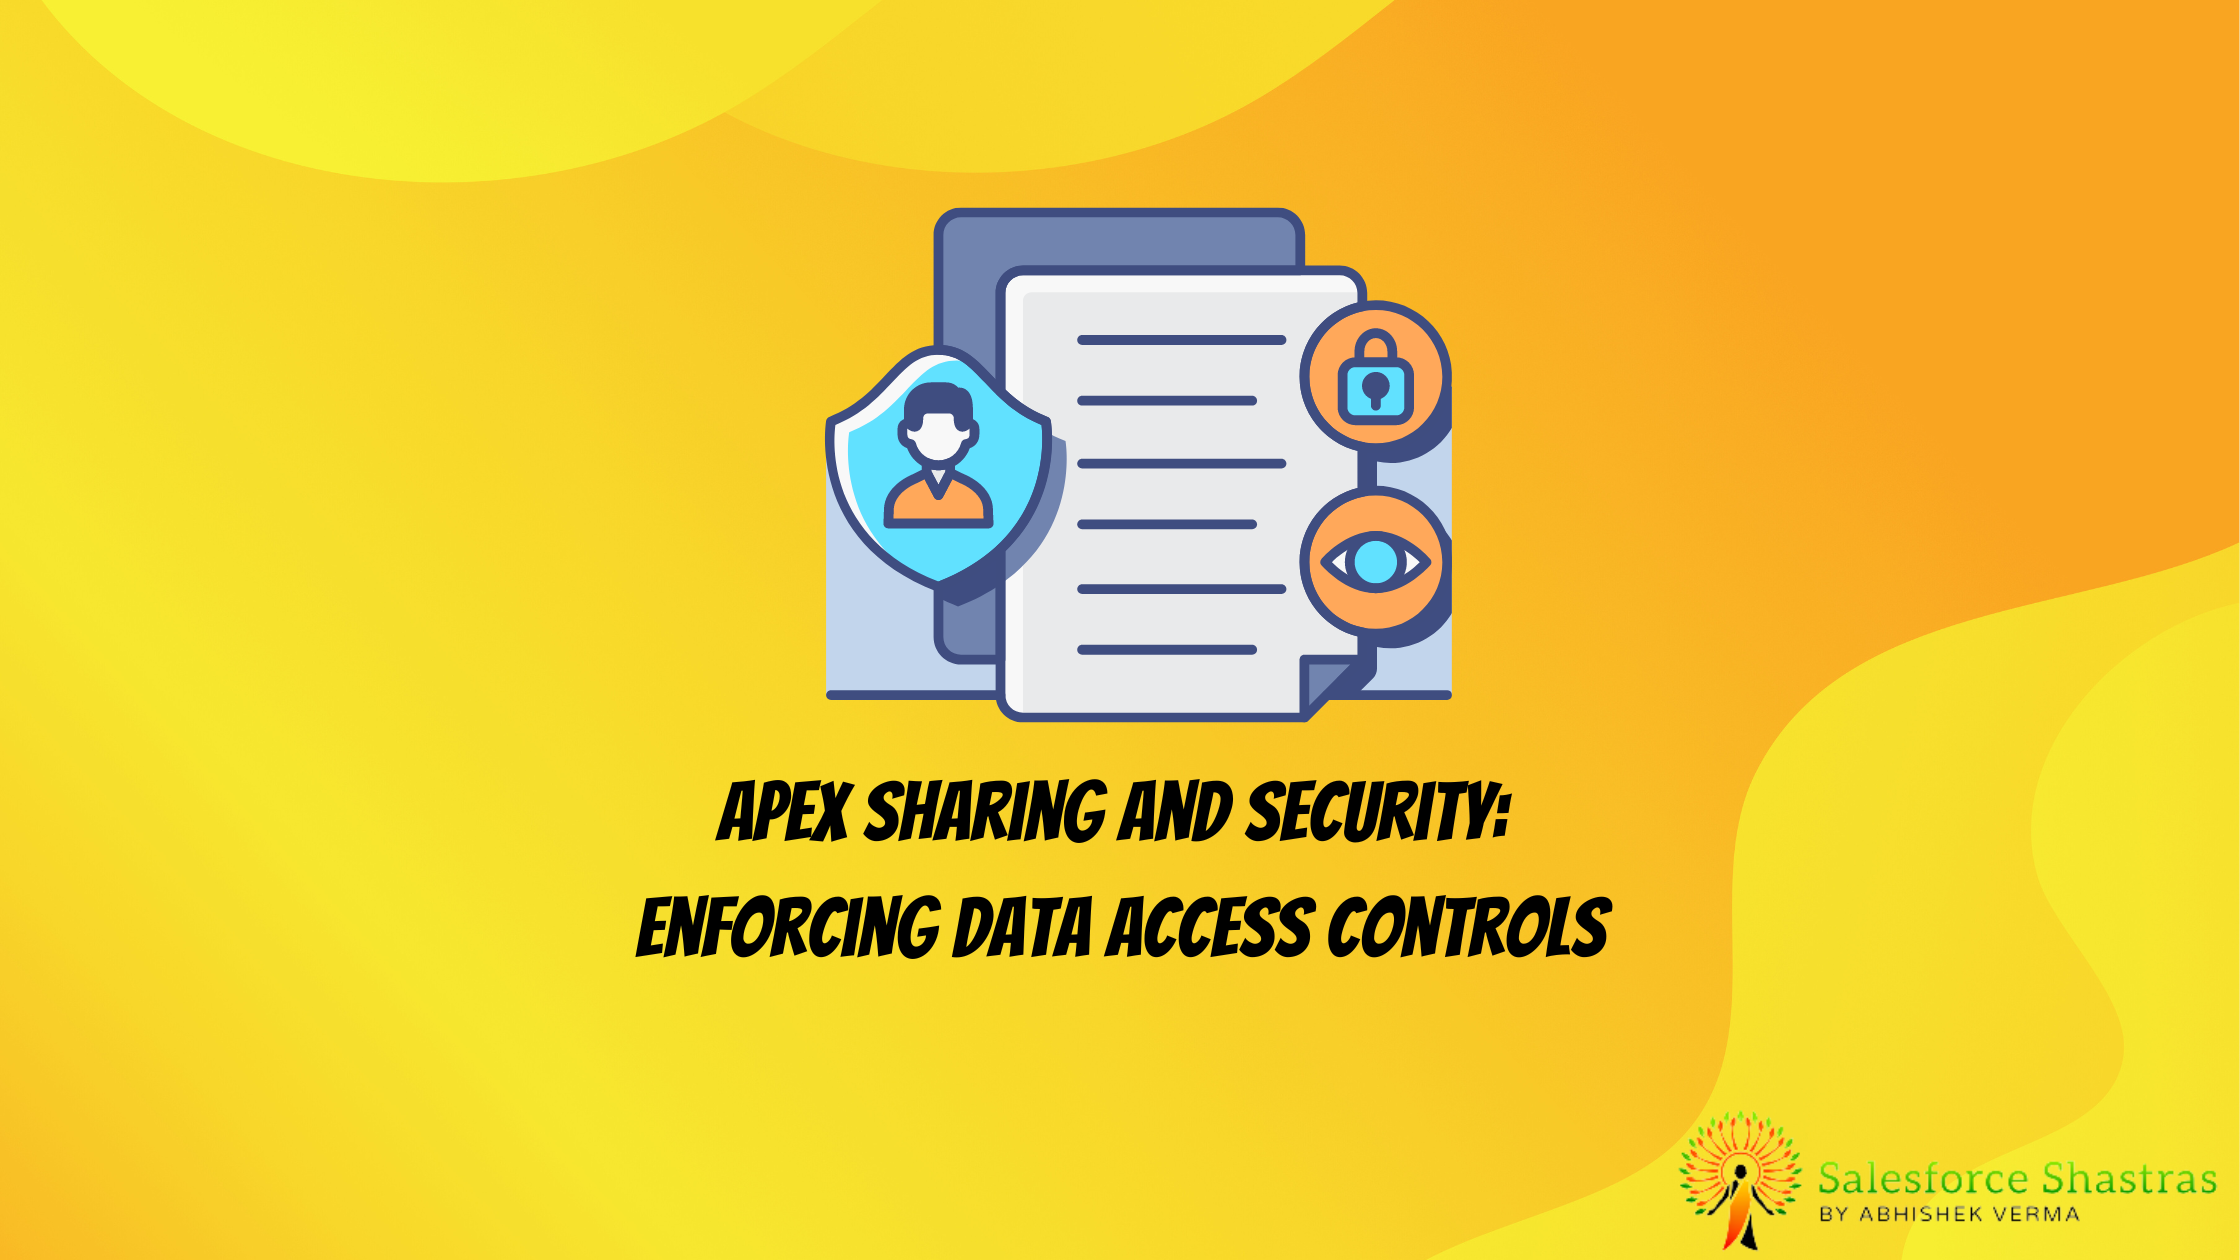 Apex Sharing and Security: Enforcing Data Access Controls